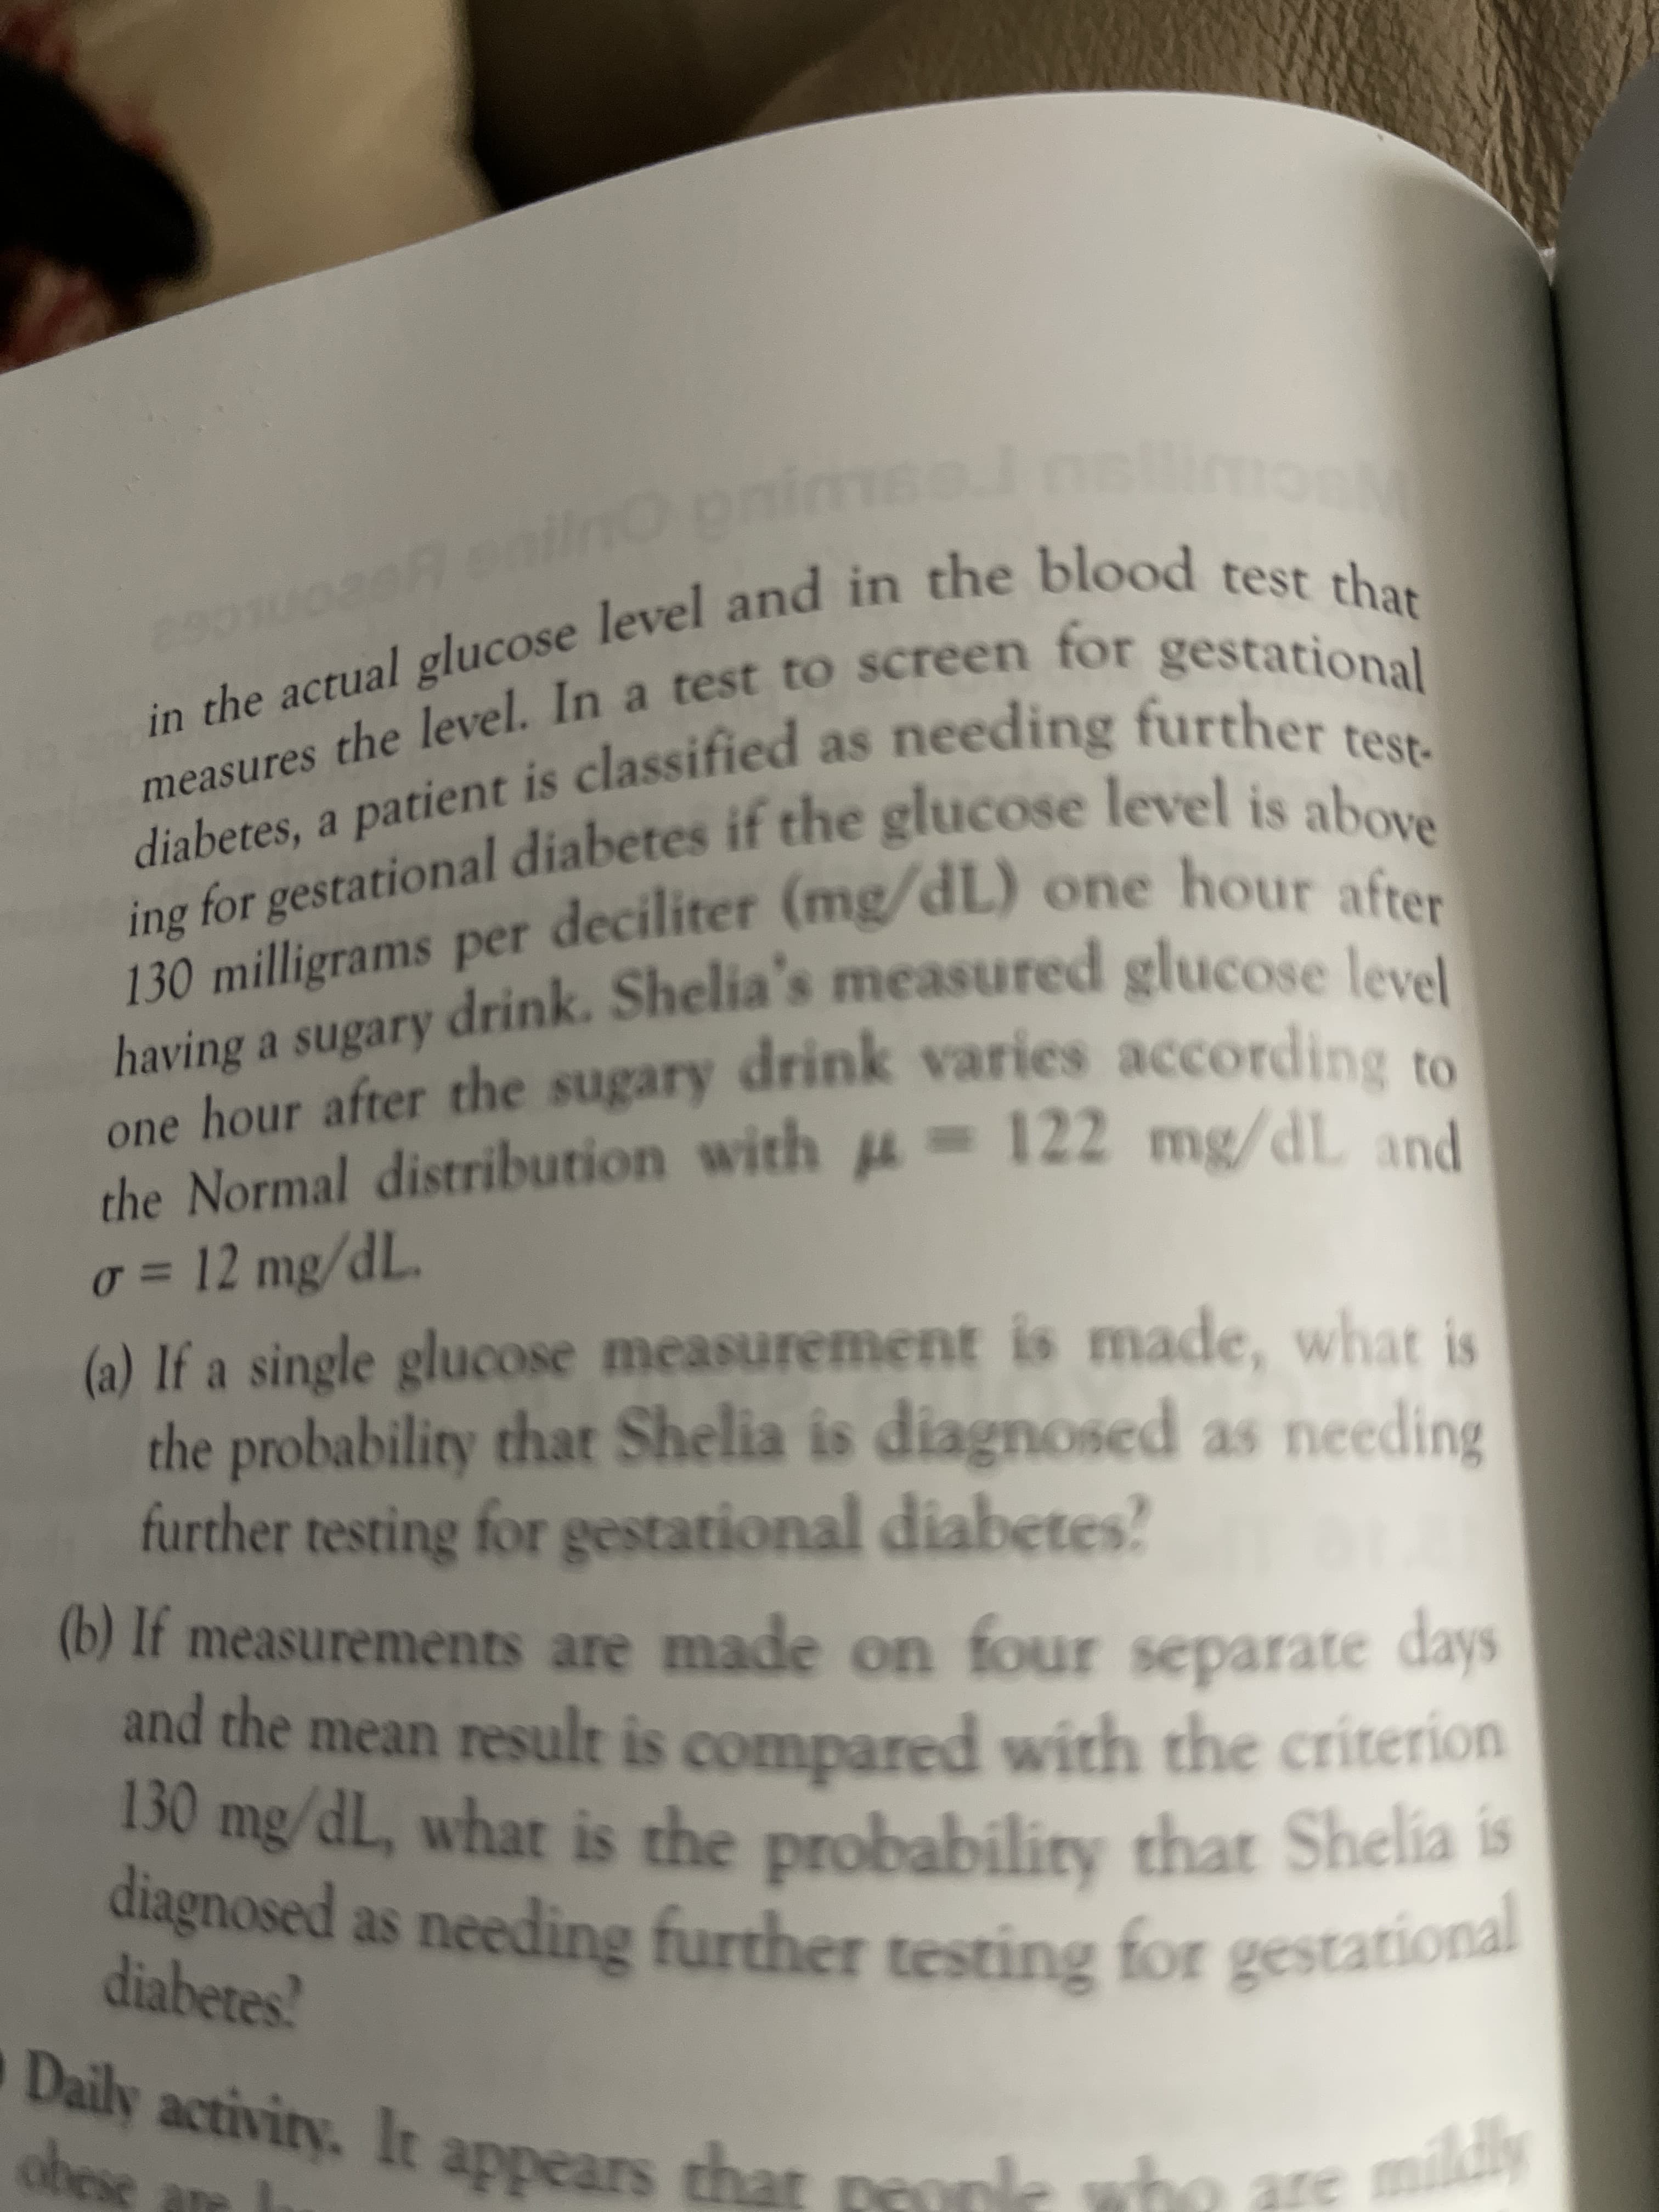 in the actual
measures the level. In a test to
diabetes, a patient is classified as needing further test-
ing for gestational diabetes if the glucose level is above
130 milligrams per /
dL) one hour after
measured glucose level
deciliter (mg
